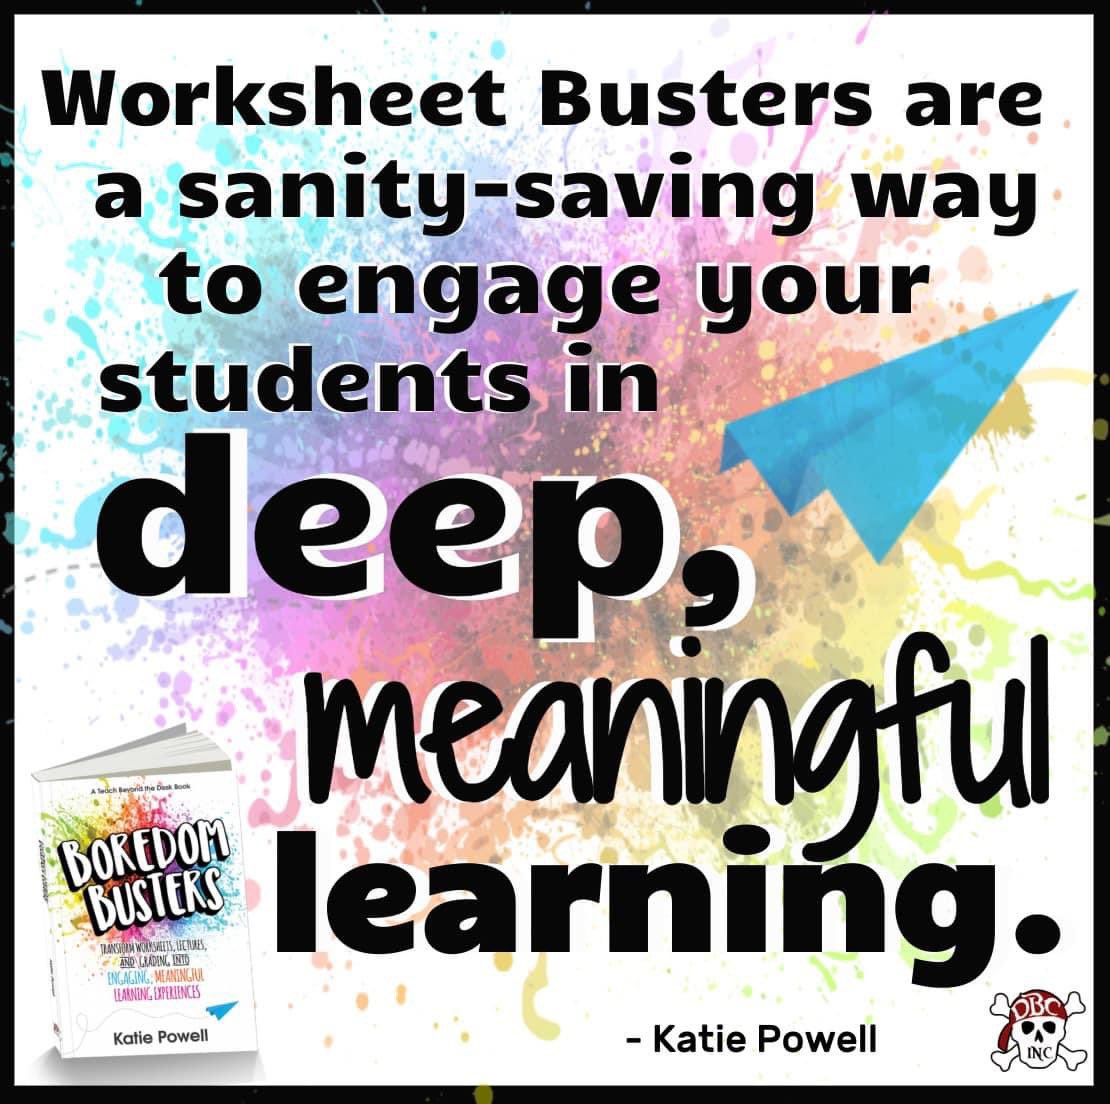 “Worksheet Busters are a smart-saving way to engage students in deep, meaningful learning.” - @Beyond_the_Desk  in #BoredomBusters
This is packed with read today, use tomorrow student engagement ideas!

a.co/d/1UDfN28
#dbcincbooks #tlap #mschat #amle